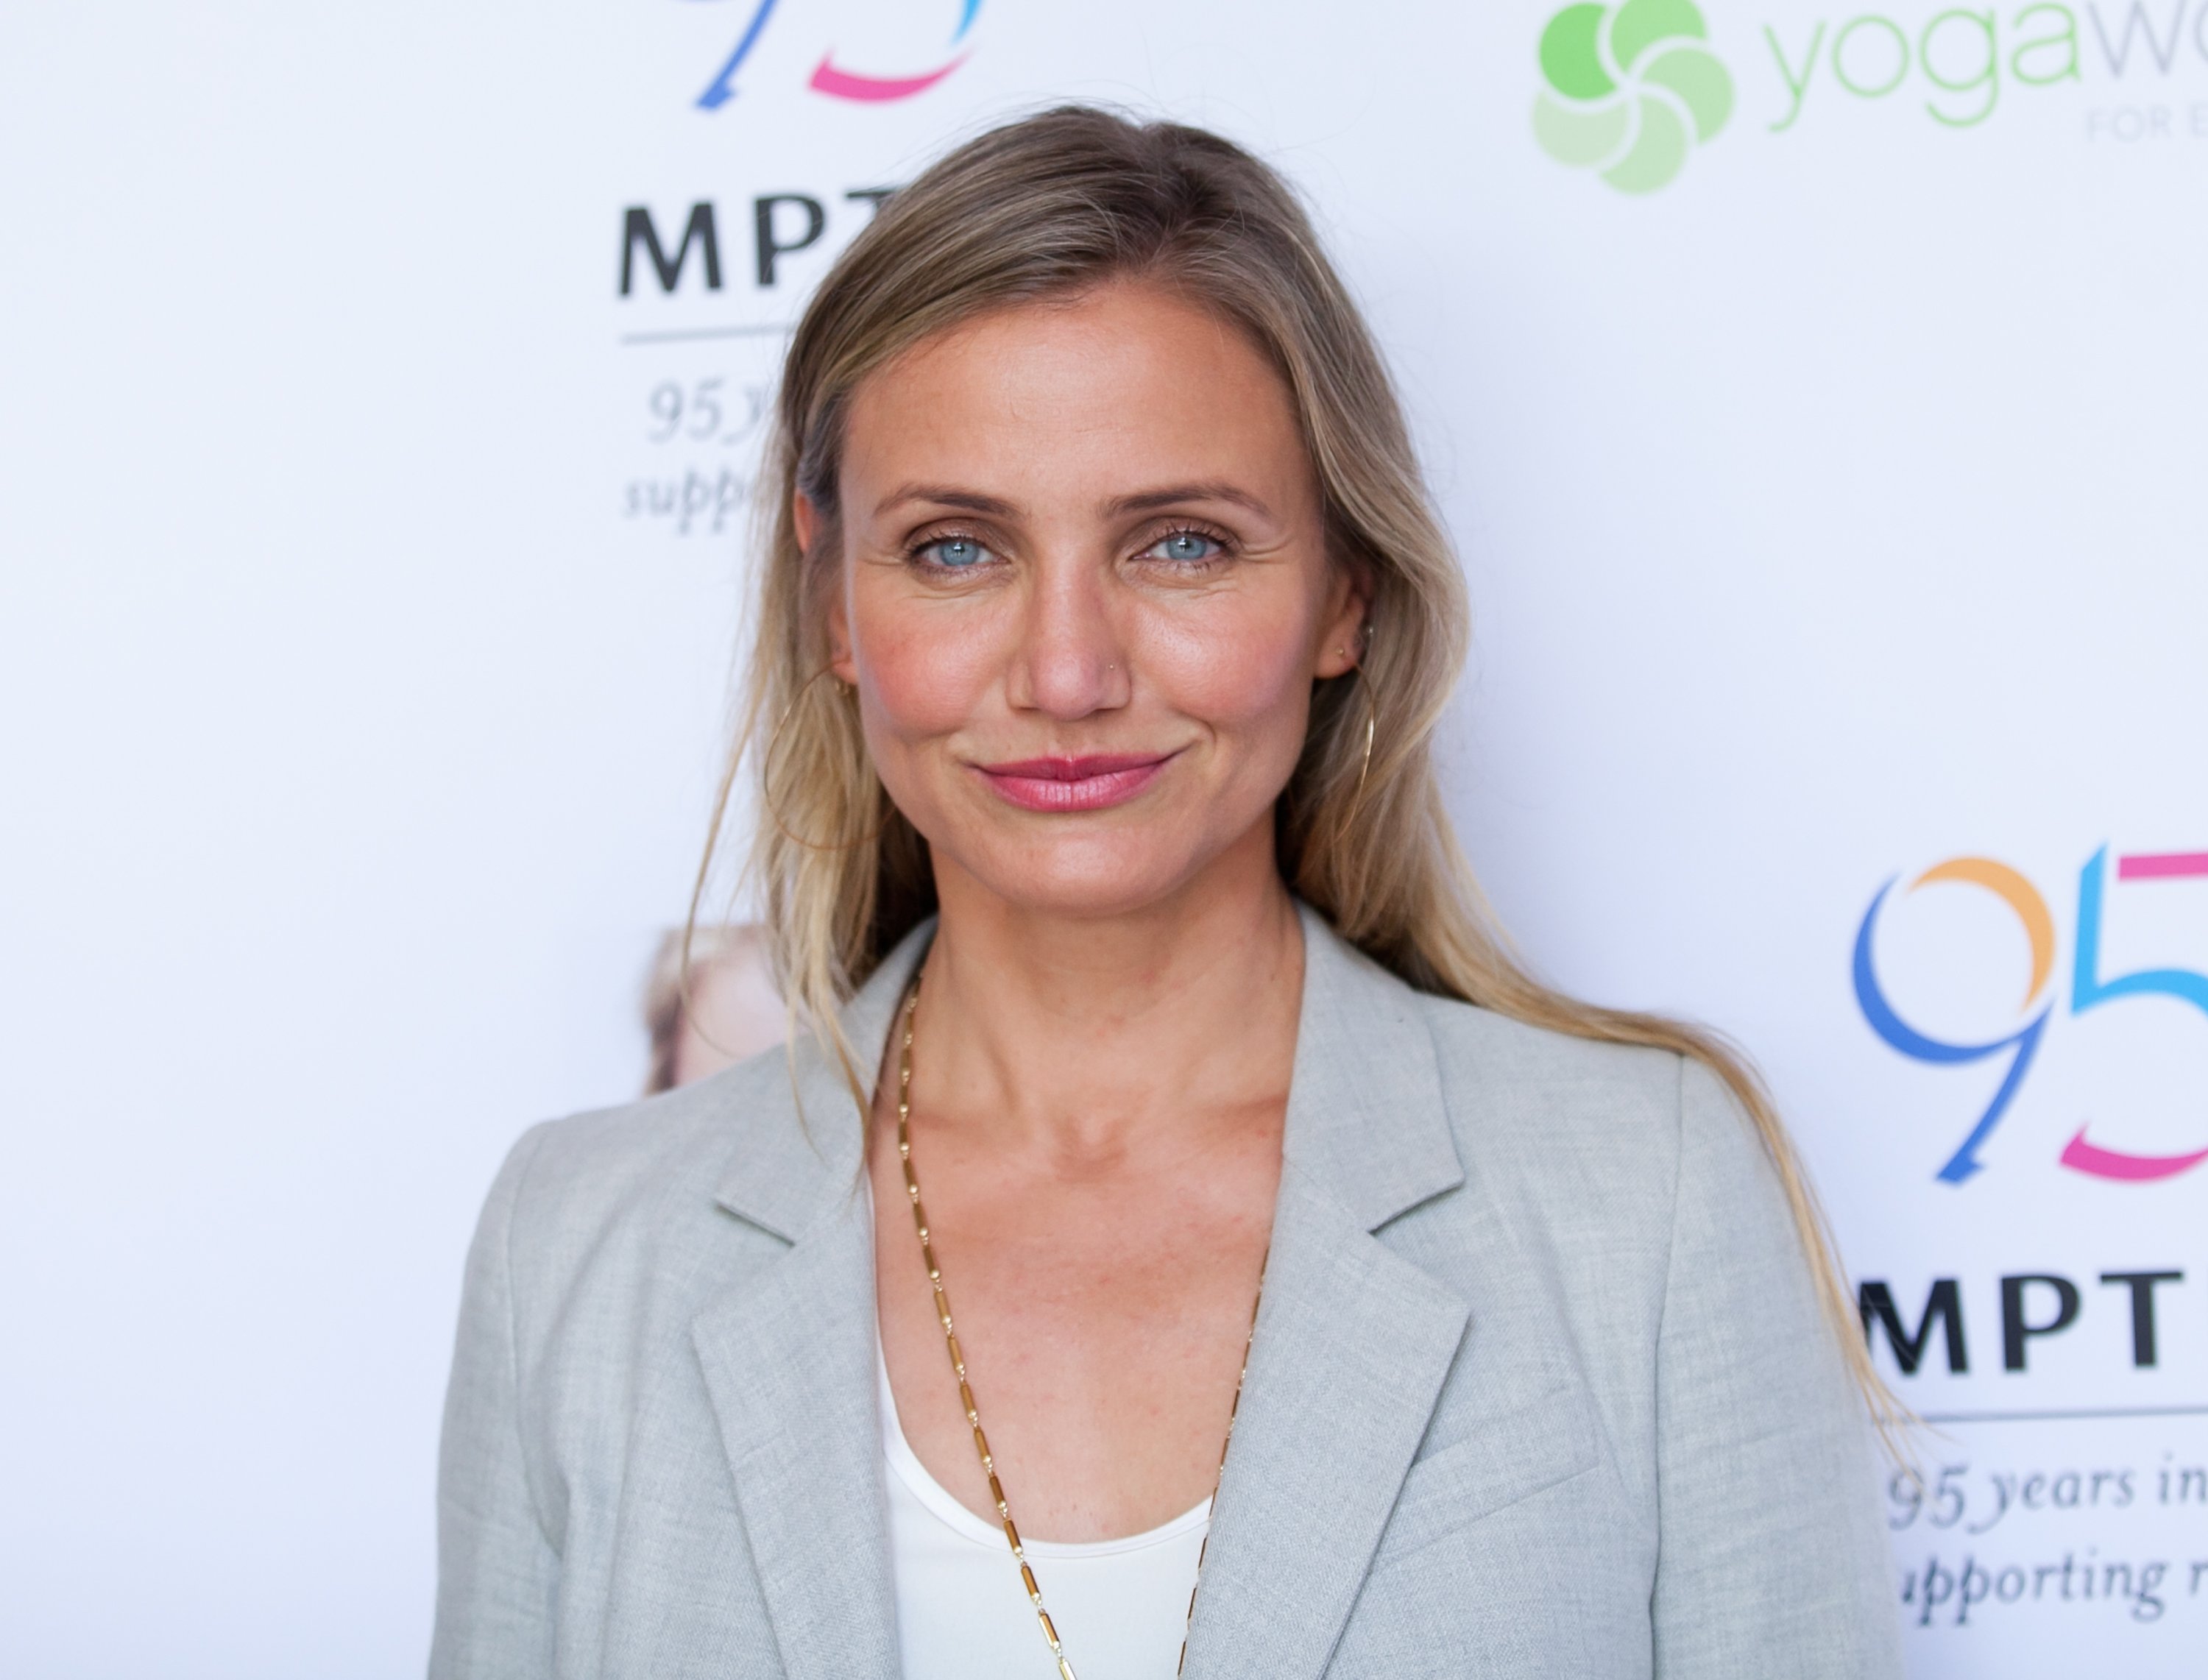 Cameron Diaz attends the MPTF Celebration for health and fitness at The Wasserman Campus on June 10, 2016, in Woodland Hills, California. | Source: Getty Images.